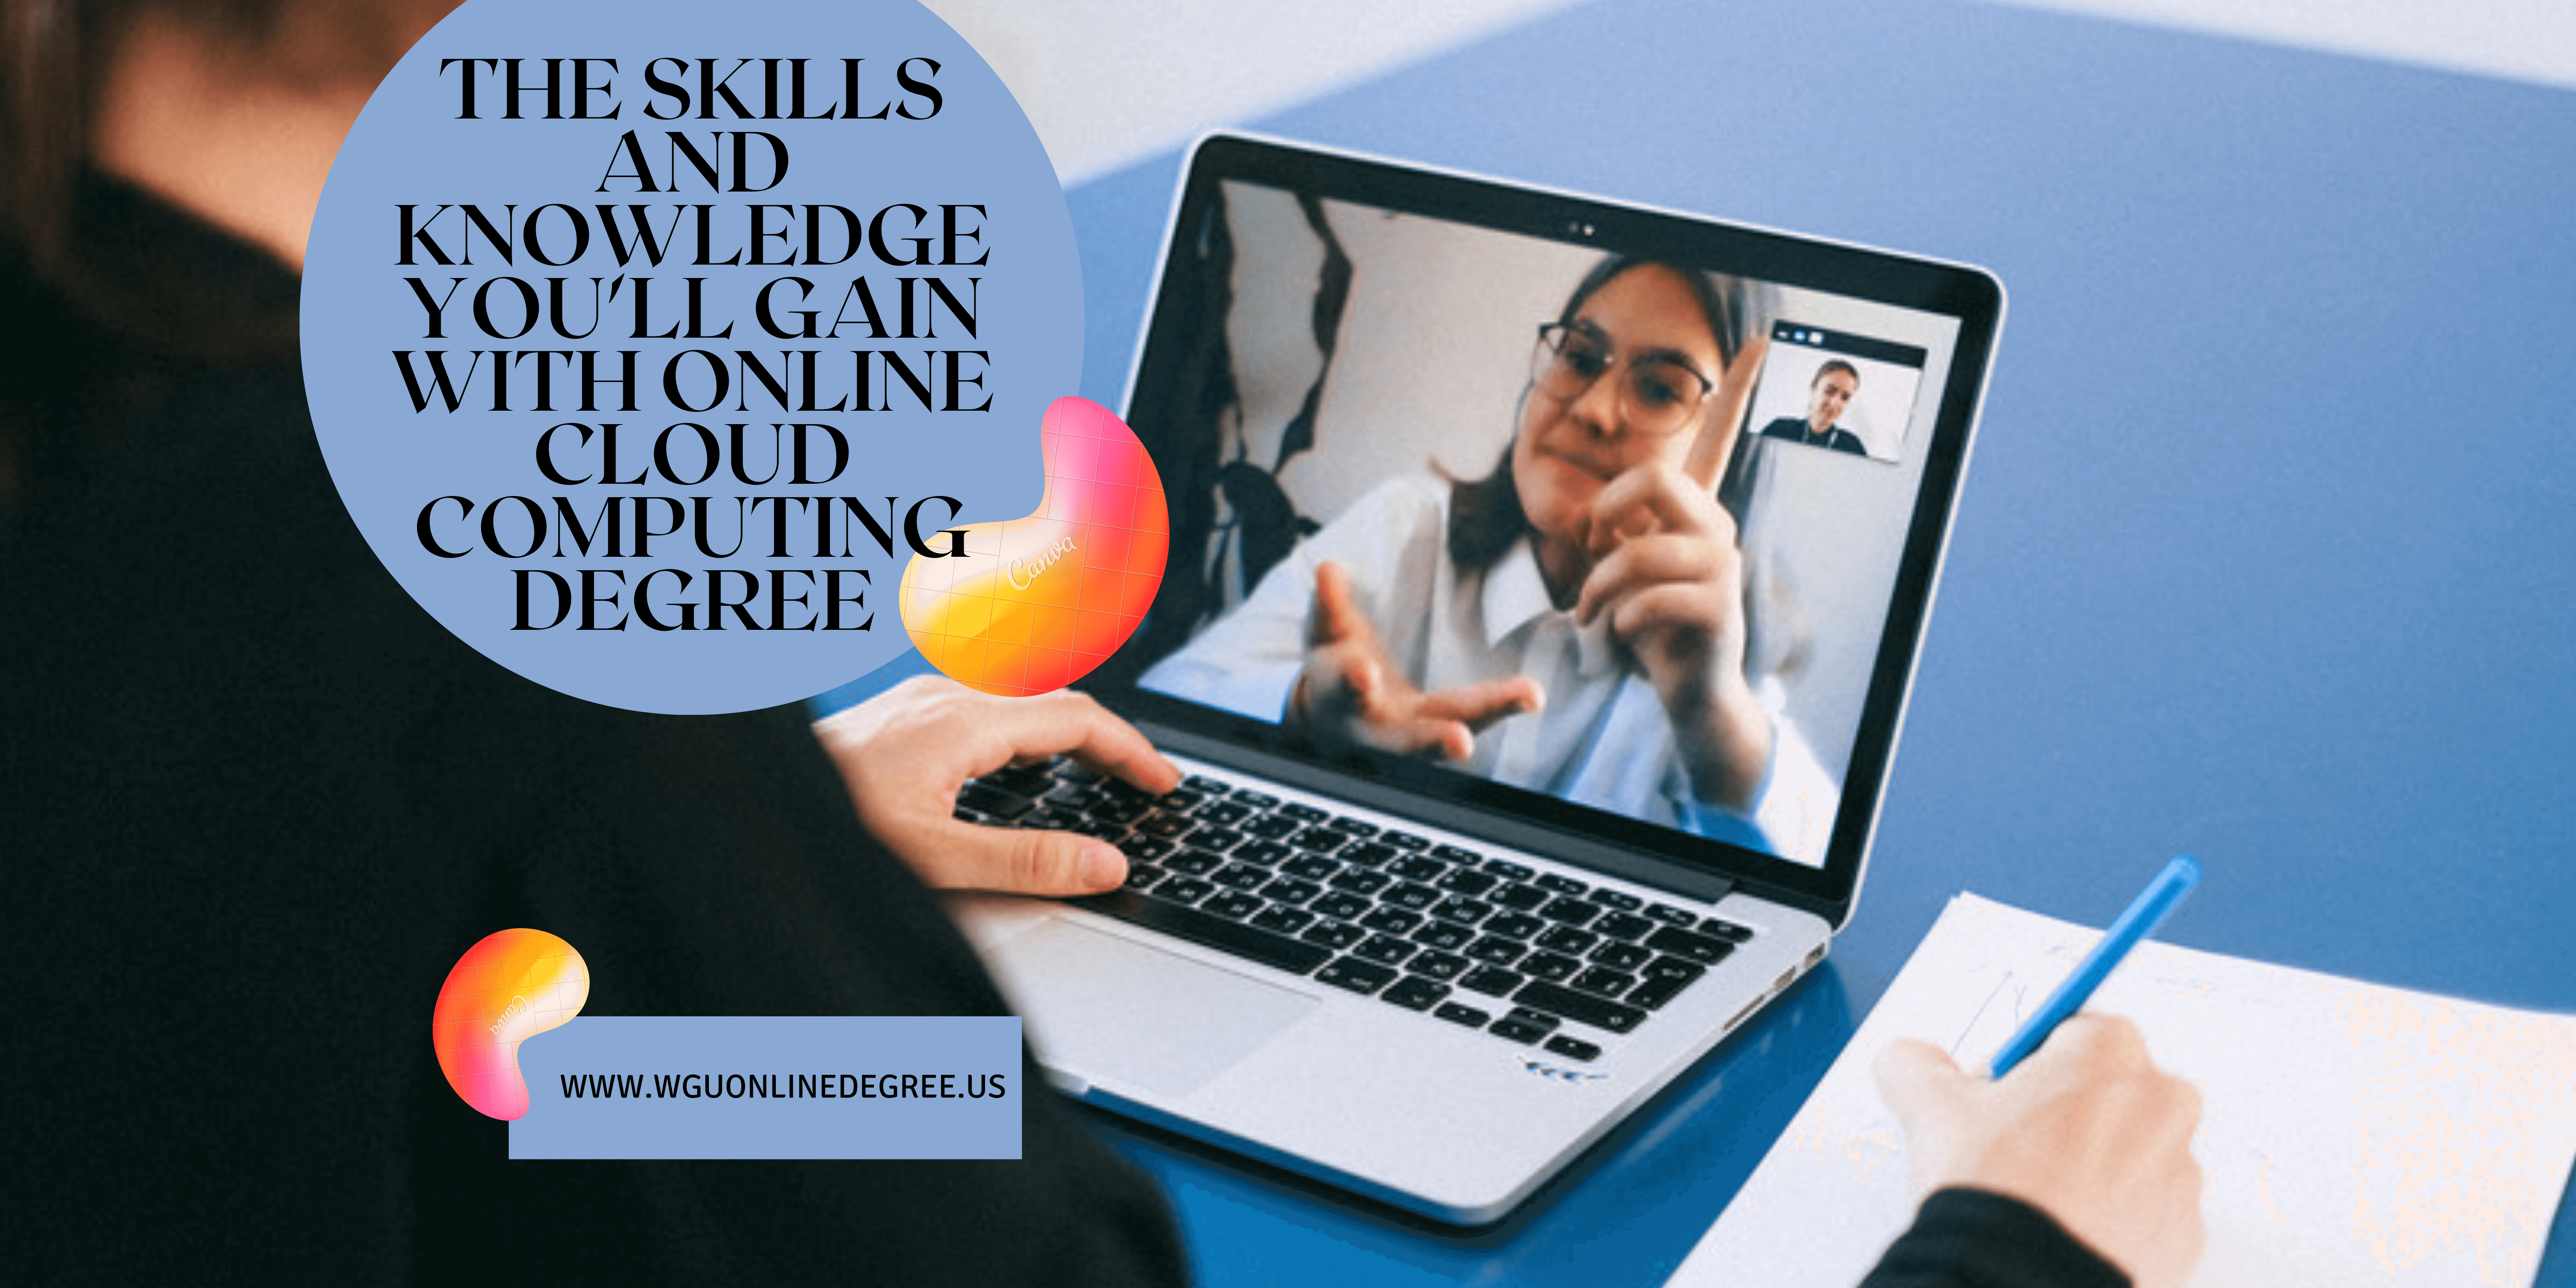 Online Cloud Computing Degree: Skills and Knowledge